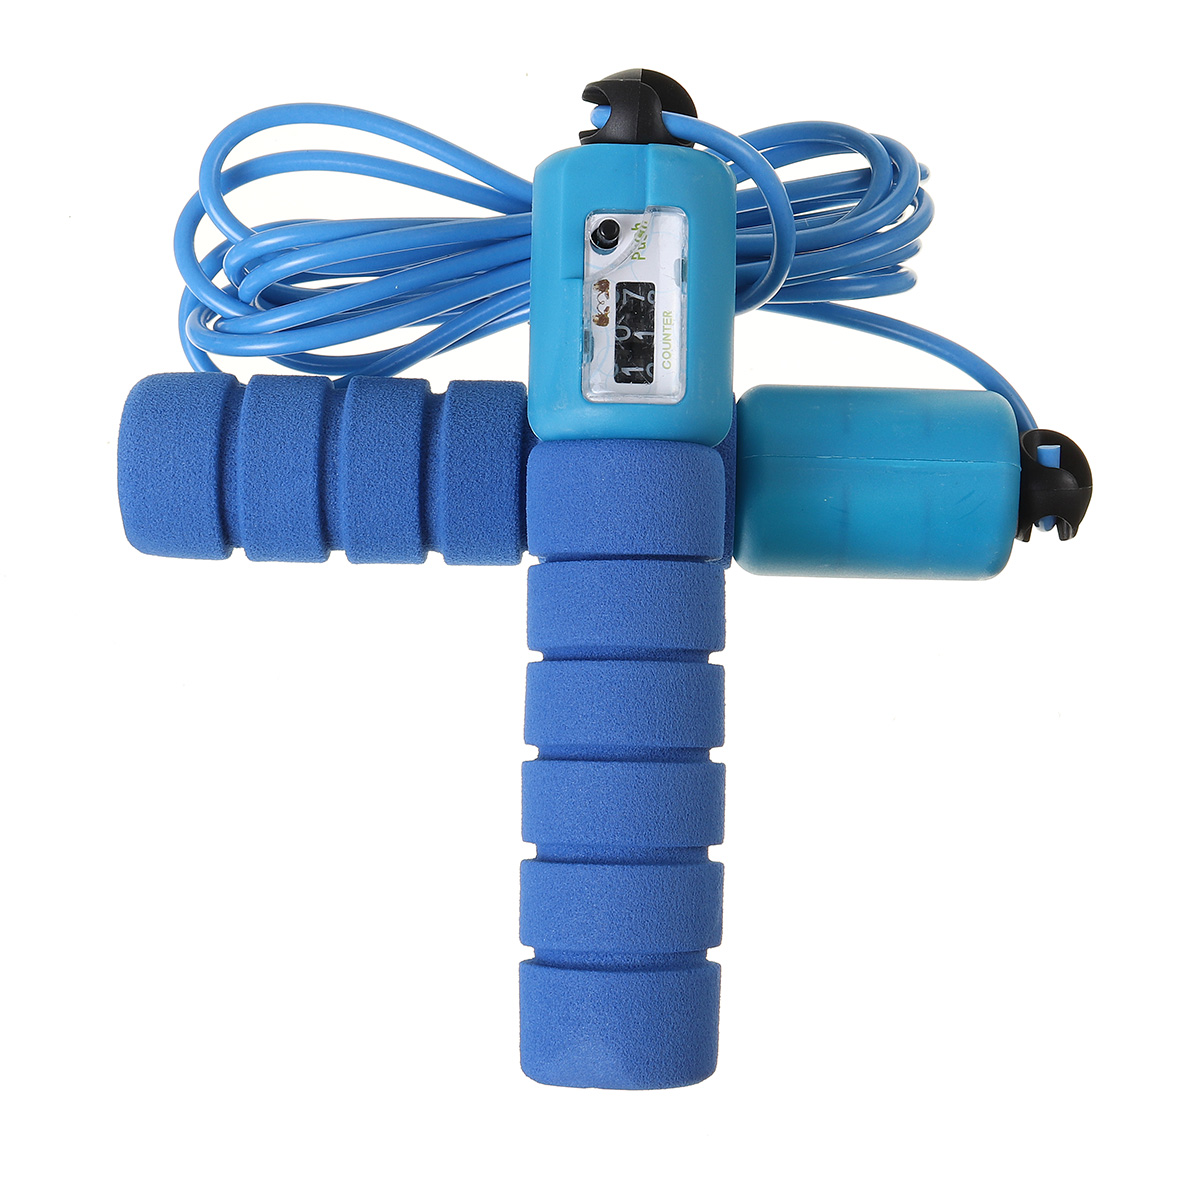 287cm-Rope-Jumping-Home-Adjustable-Speed-Training-Sport-Fitness-Skipping-Rope-1678695-4